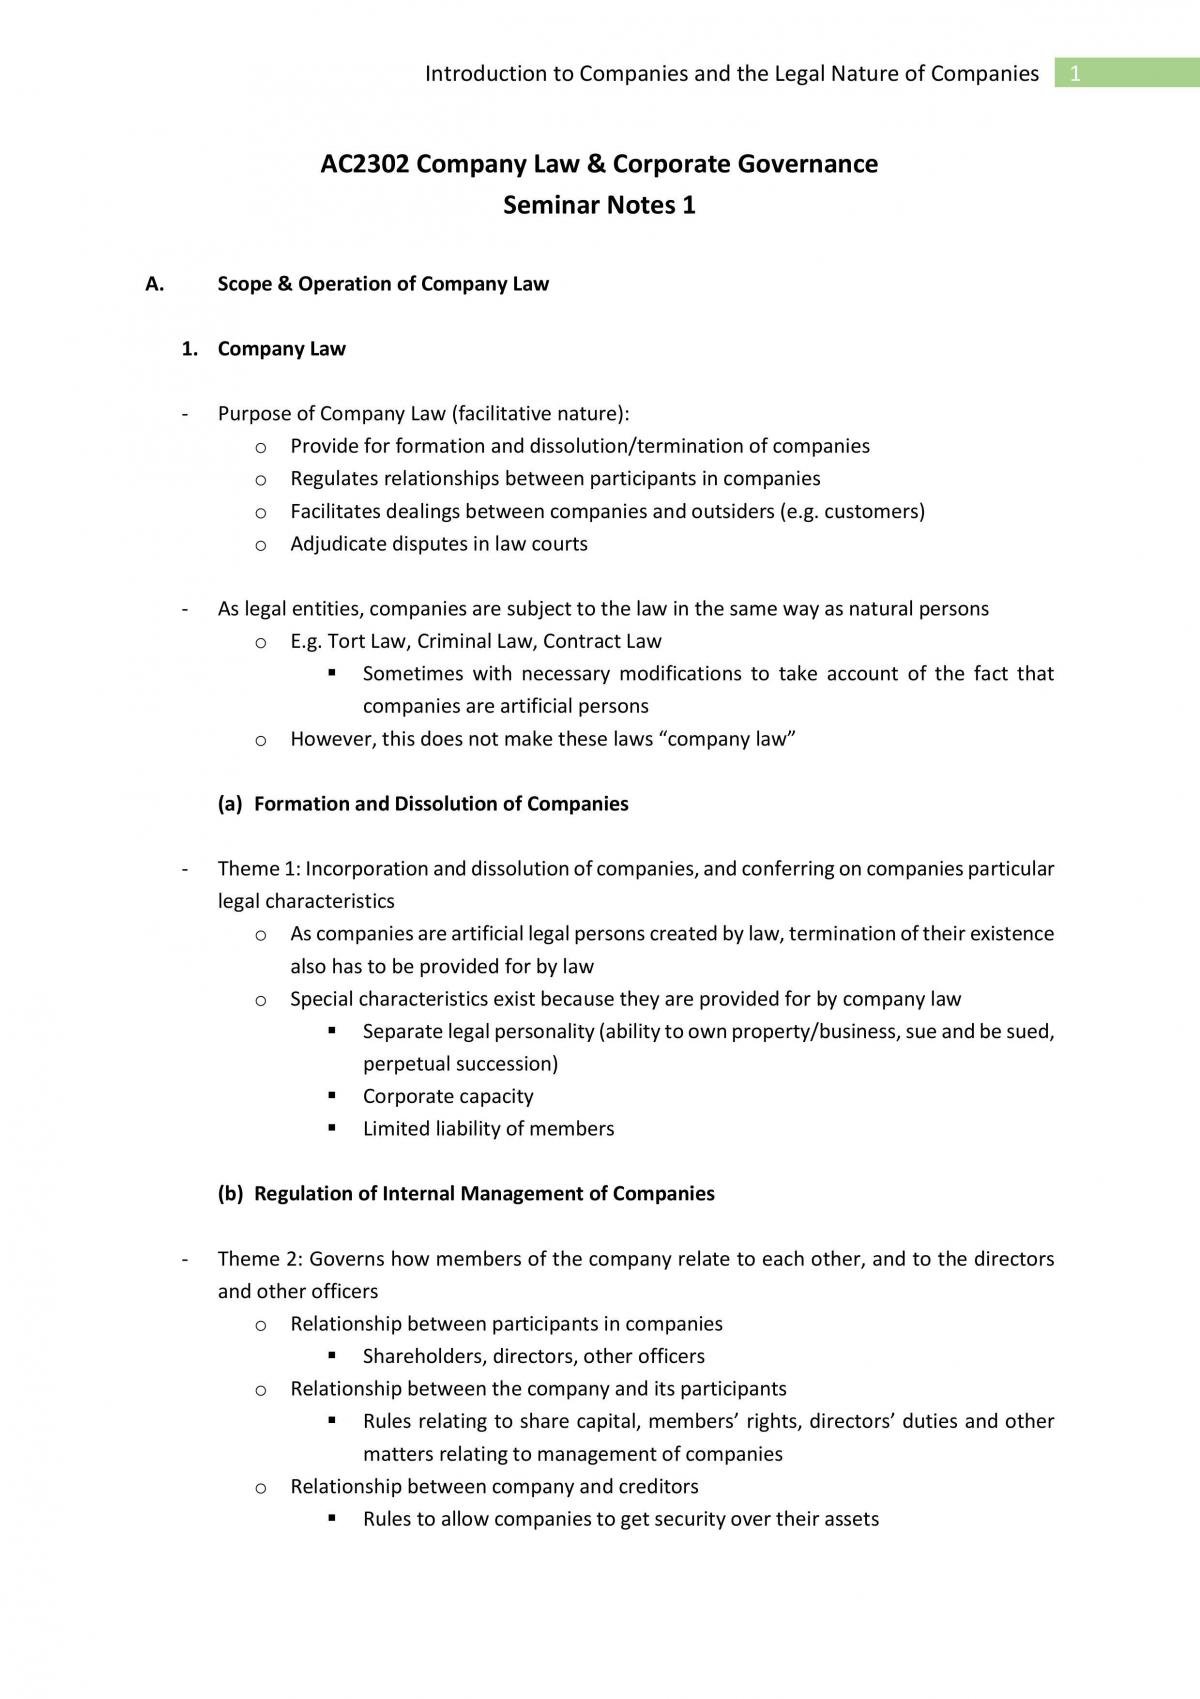 AC2302 Company Law & Corporate Governance Bible (Full) - Page 1